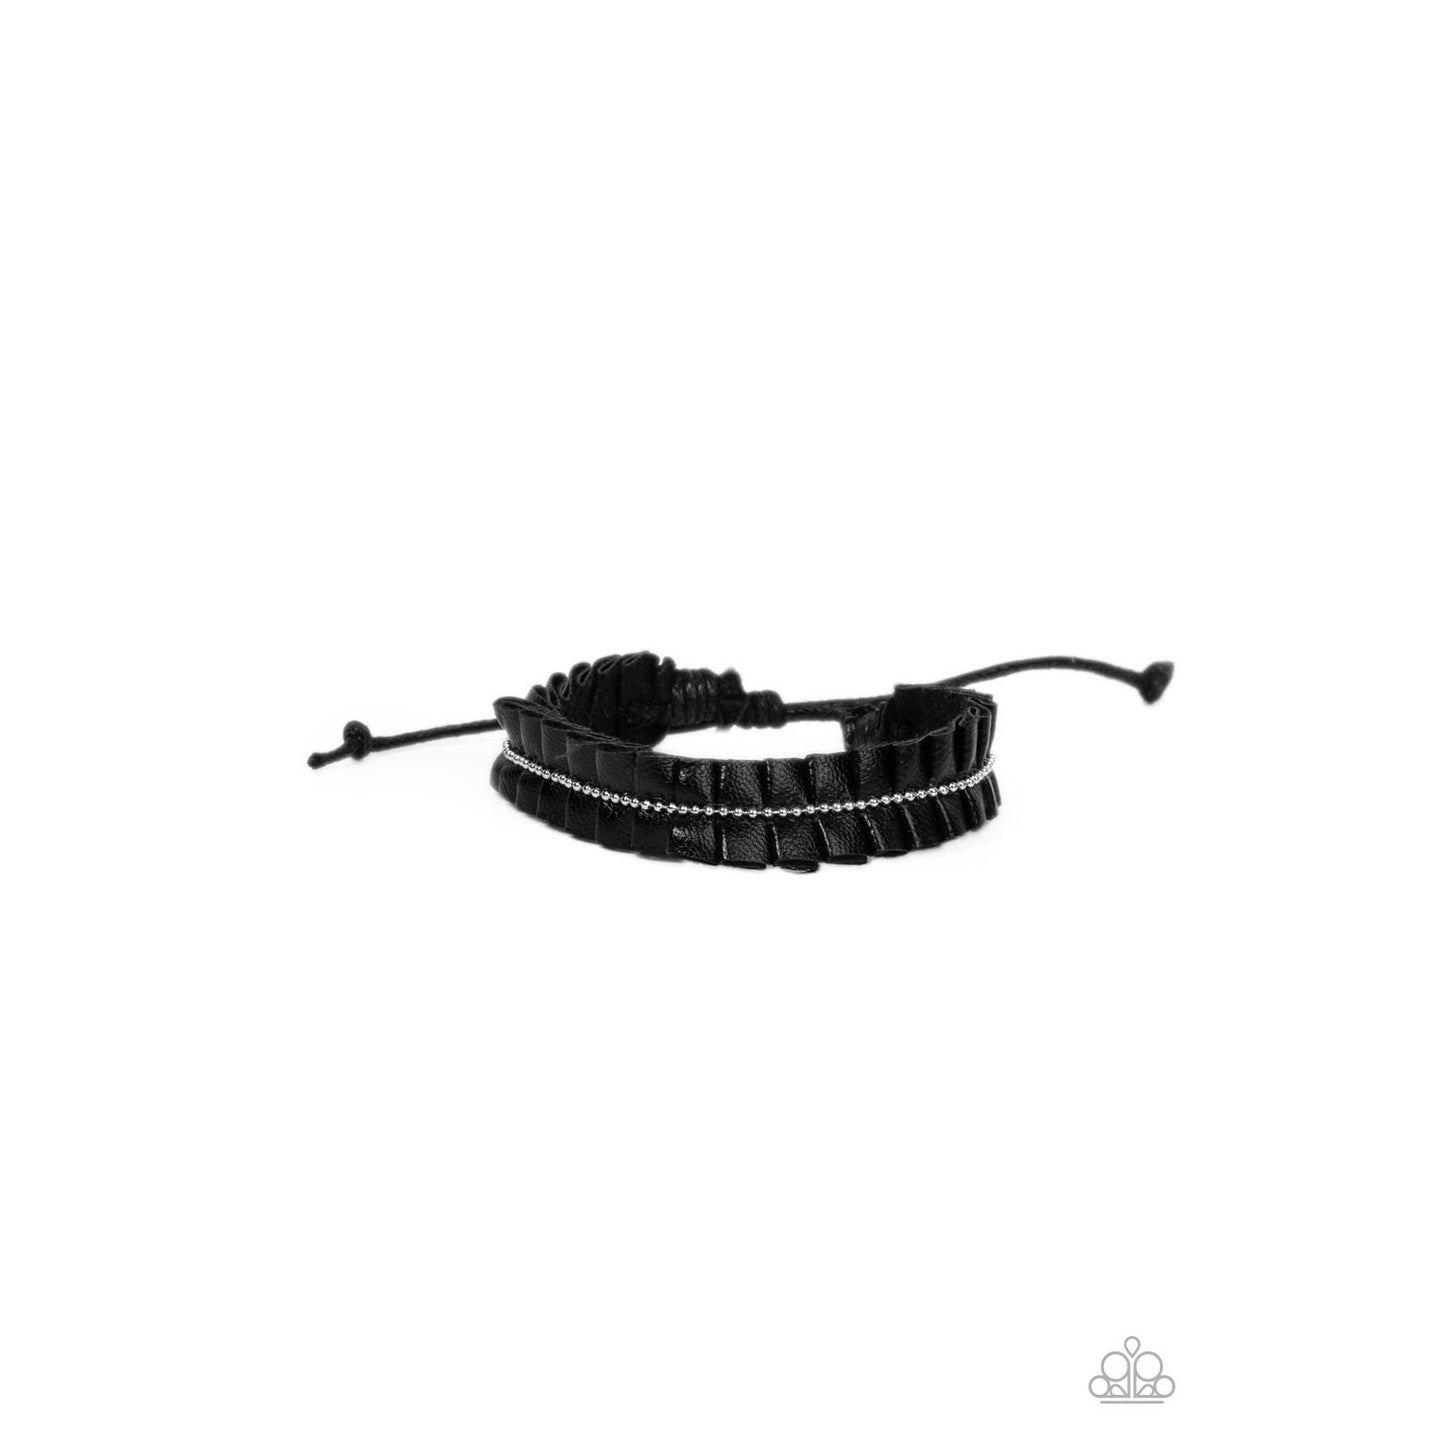 Hard to PLEATS - Black Leather Bracelet - A Large Selection Hand-Chains And Jewelry On rainbowartsreview,Women's Jewelry | Necklaces, Earrings, Bracelets